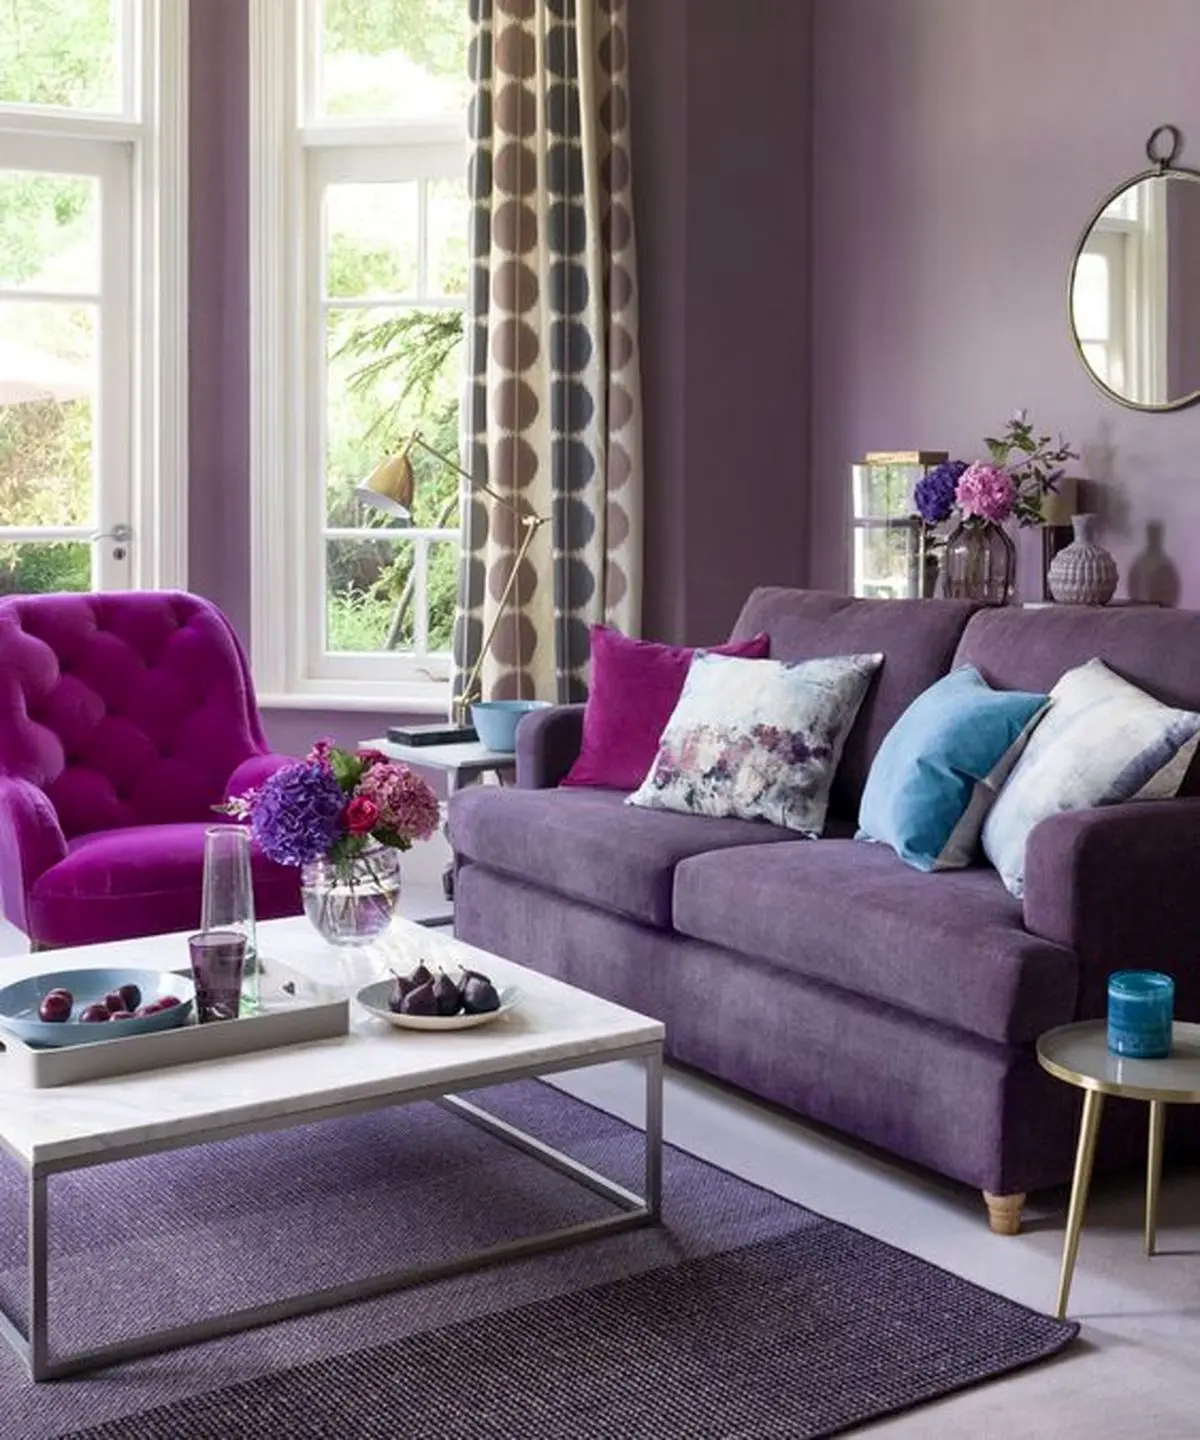 23-a-monochromatic-living-room-with-lavender-walls-a-purple-sofa-a-hot-pink-chair-floral-pillows-and-printed-curtains